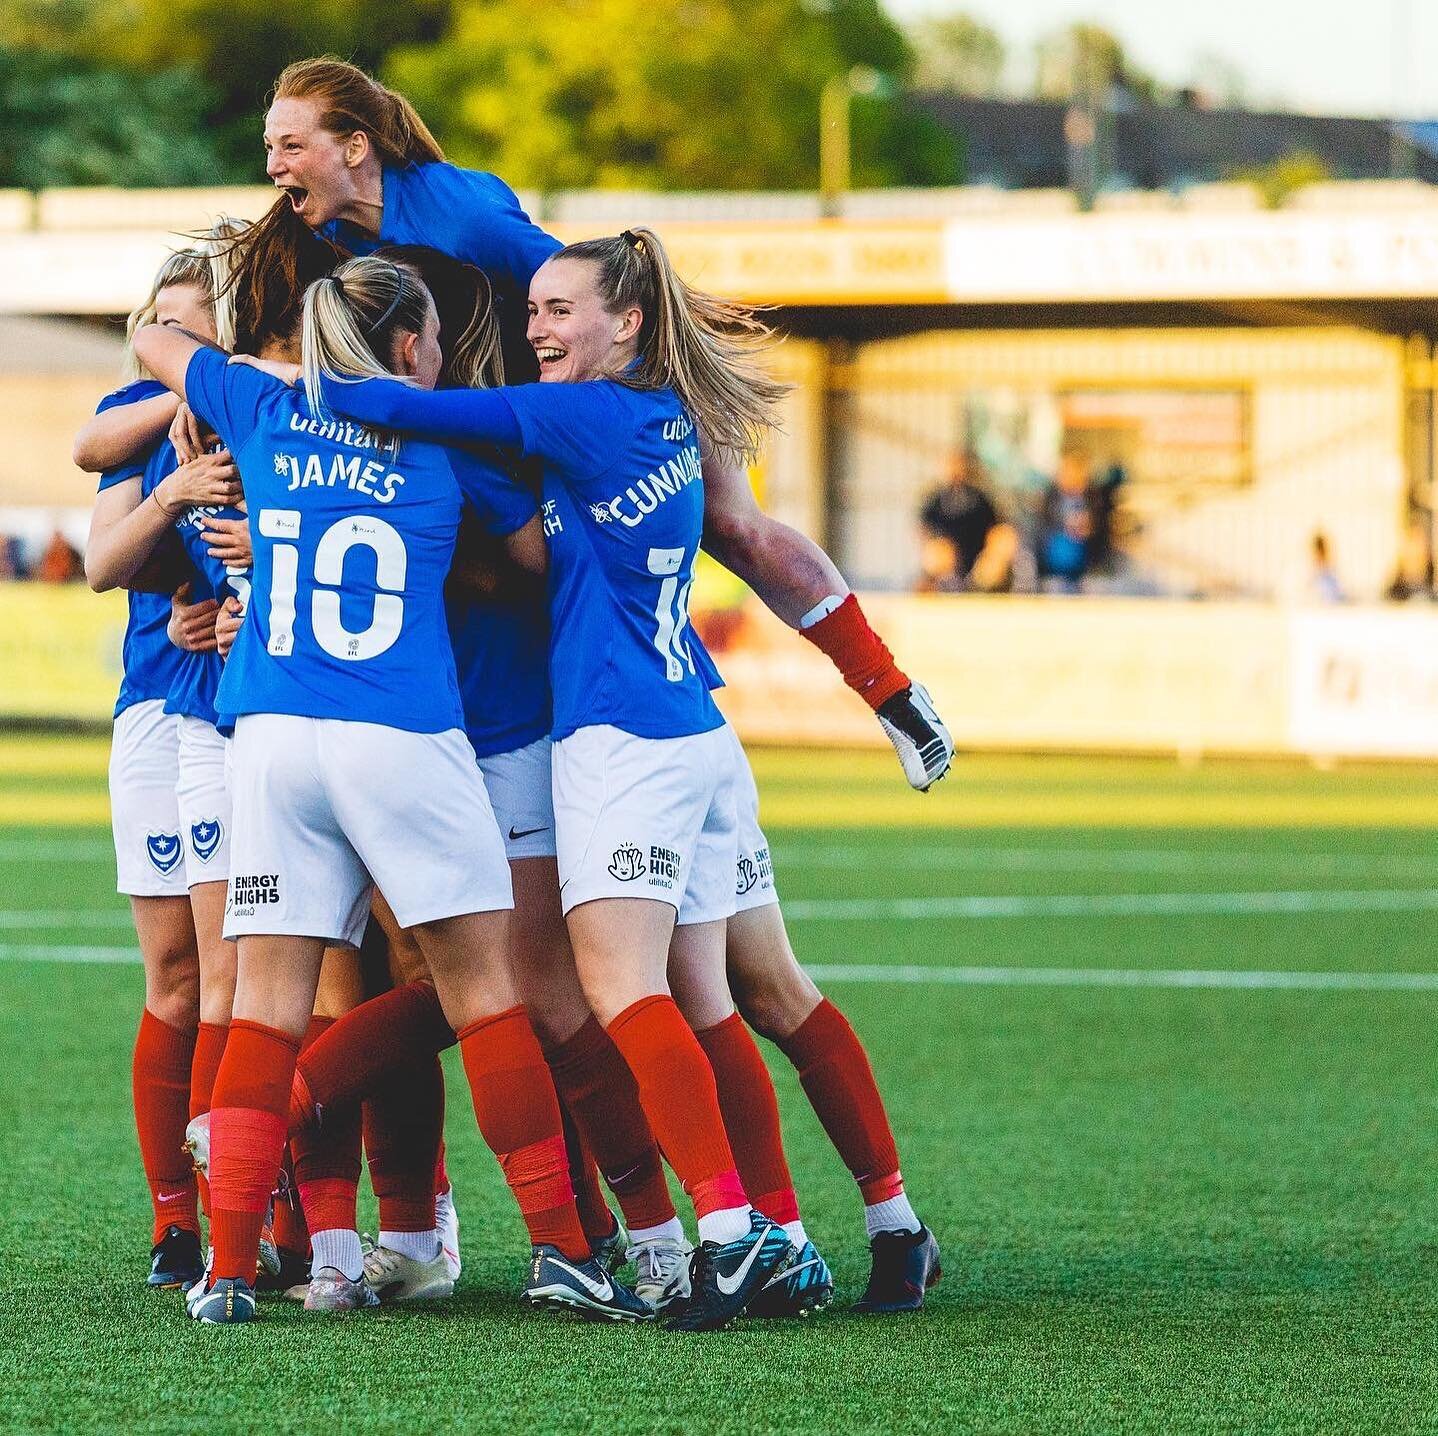 Congratulations to twelfth-time Hampshire champions @pompeywomen @officialpompey 🏆🏆🏆🏆🏆🏆🏆🏆🏆🏆🏆🏆

#Pompey #hampshirefa #adoptsouth #portsmouthwfc #portsmouthfc #footballphotography #footballphoto #champions